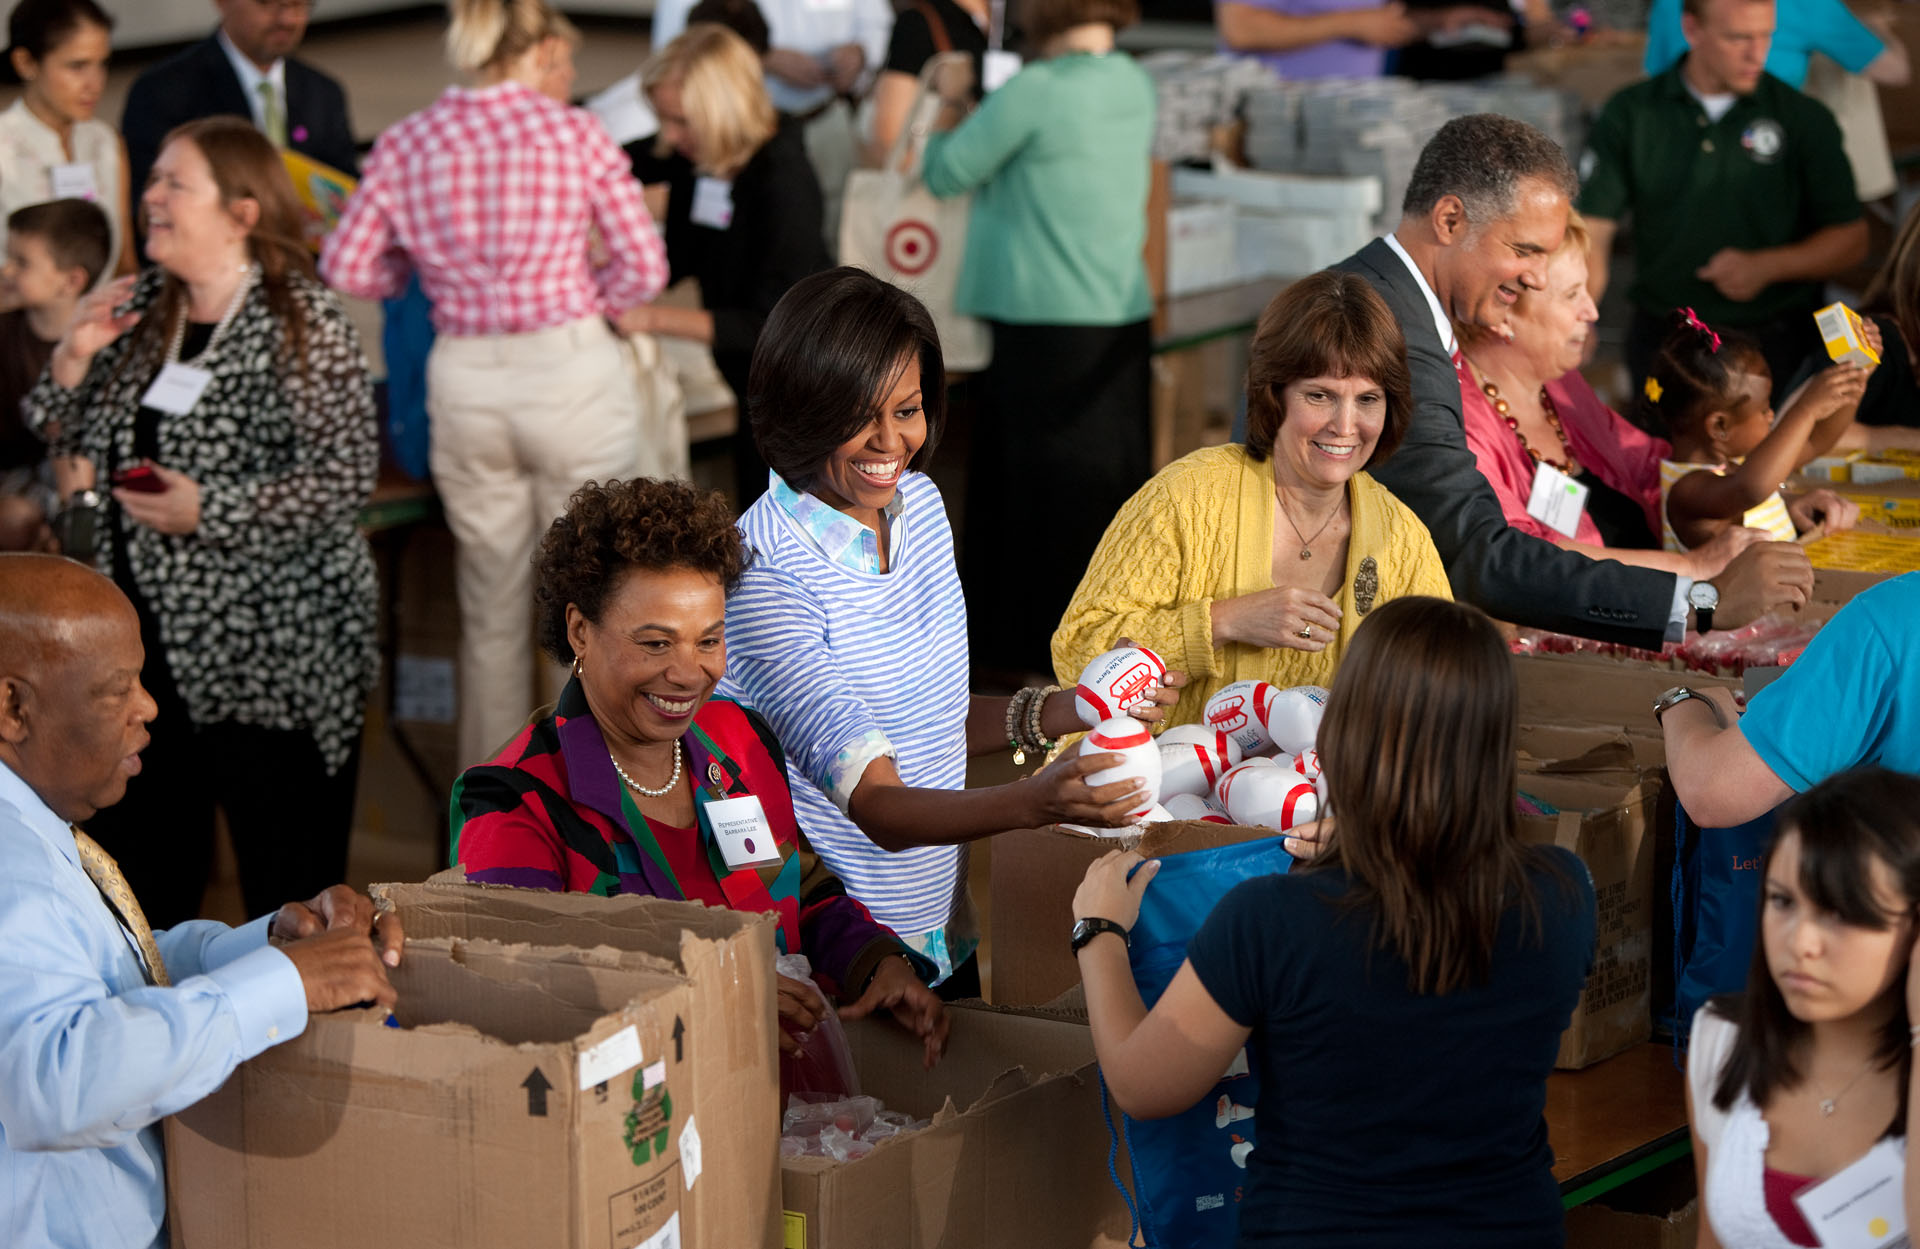 First Lady Michelle Obama helps fill care packages during a Congressional Service